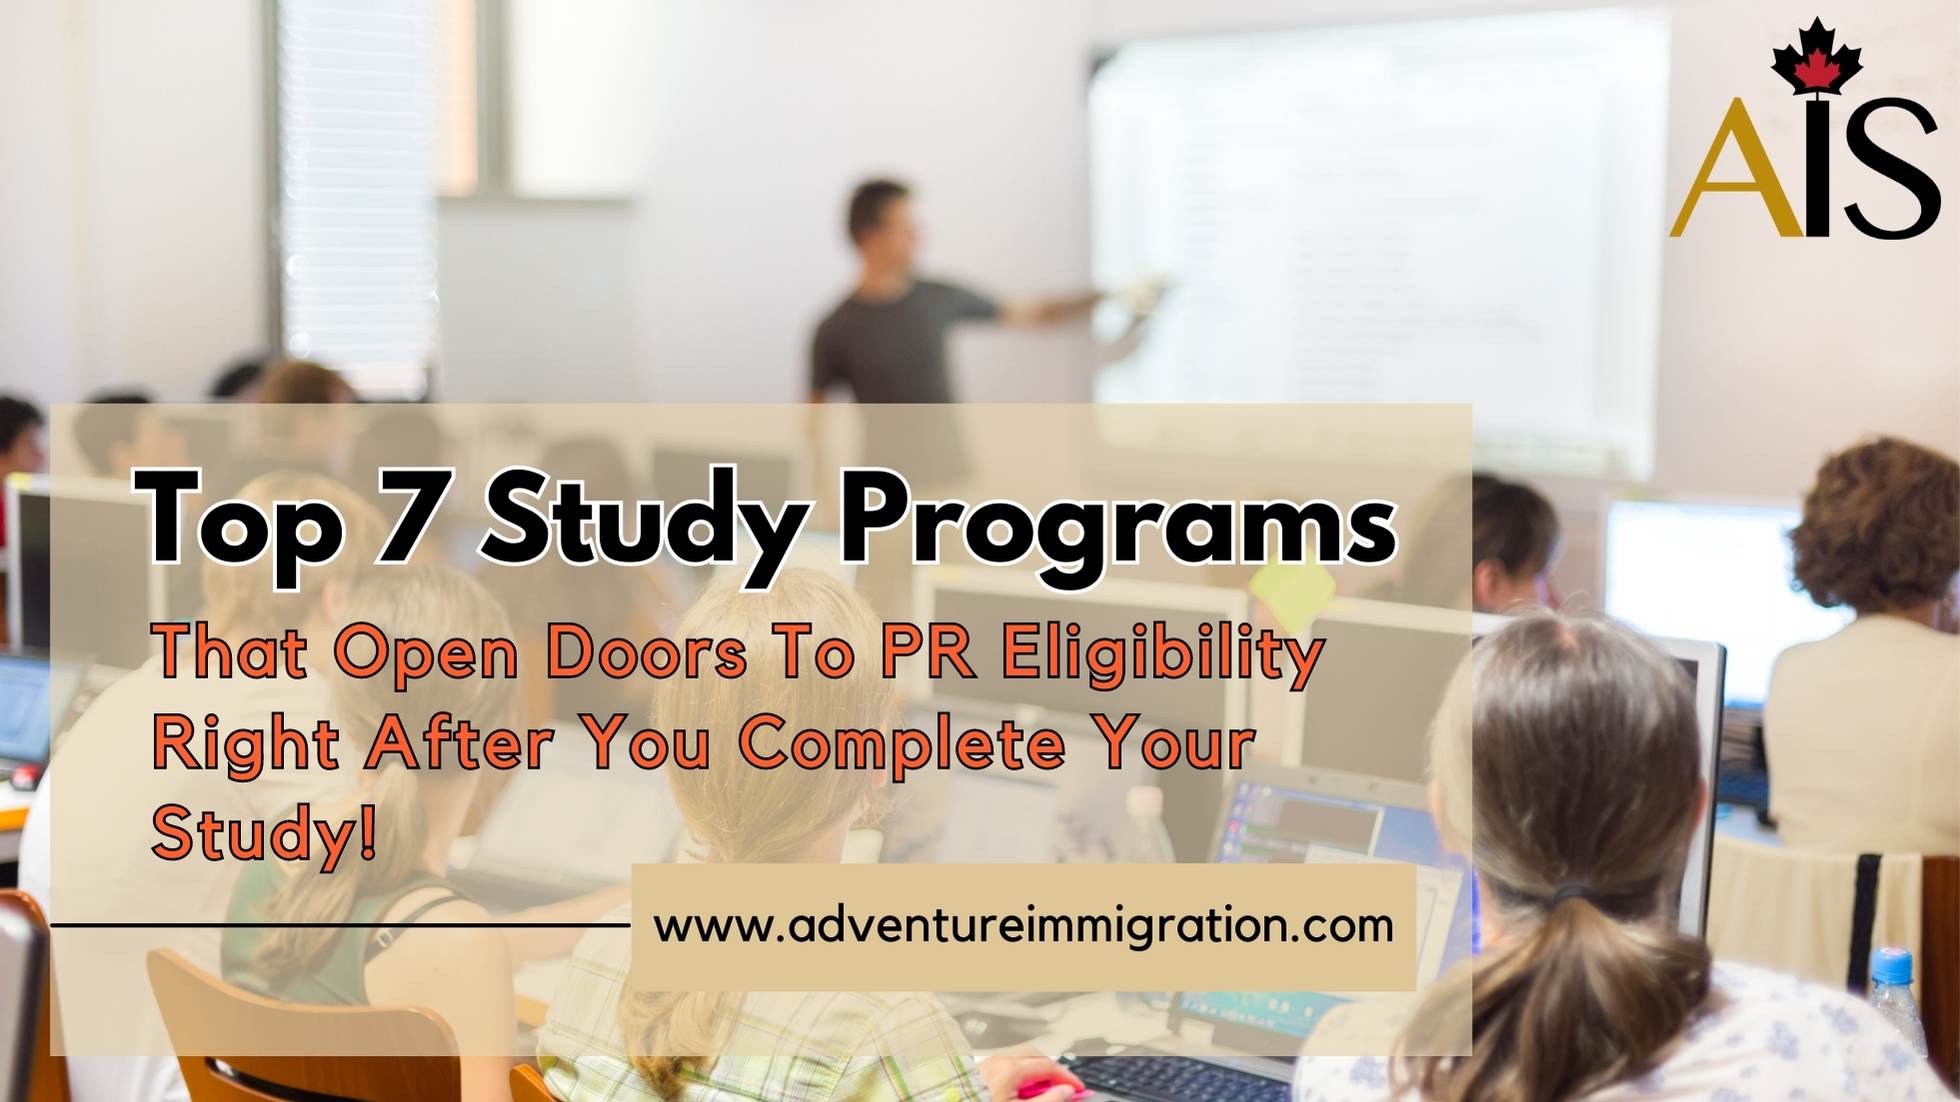 Top 7 Study Programs That Open Doors To PR Eligibility Right After You Complete Your Study!